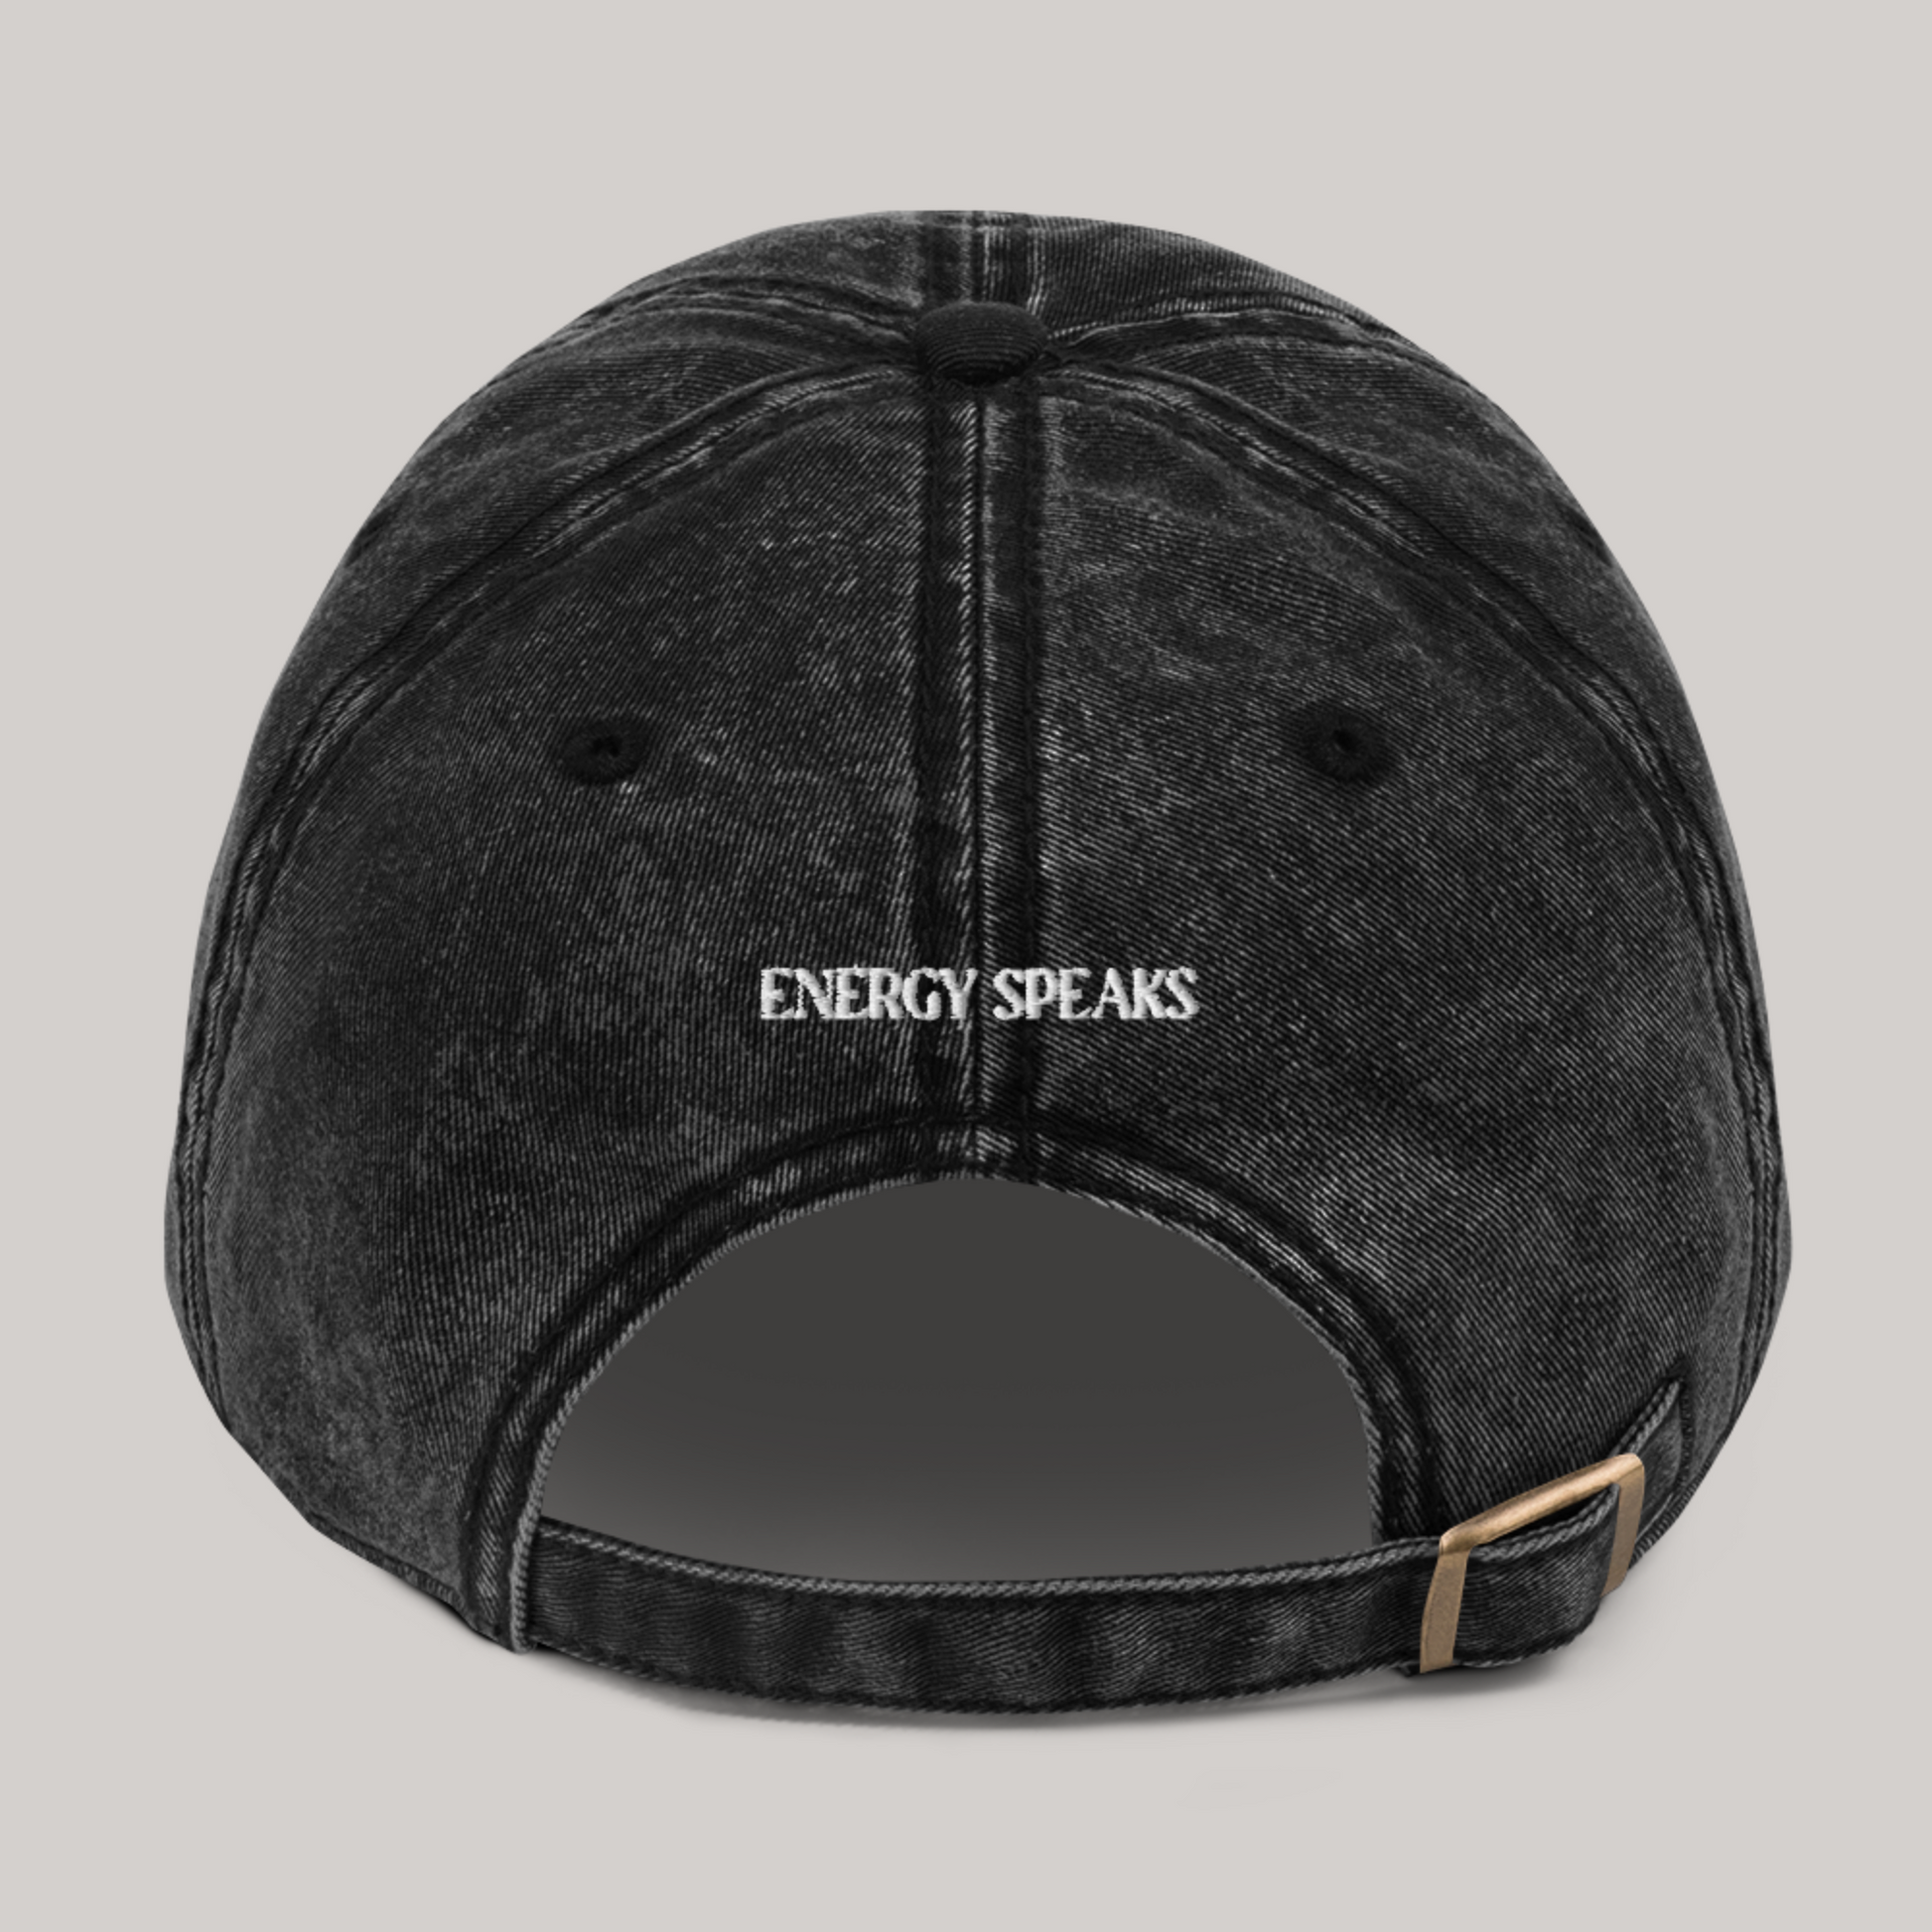 Energy speaks cap: black edition. Washed out effect, back text embroidery. Adjustable metal buckle